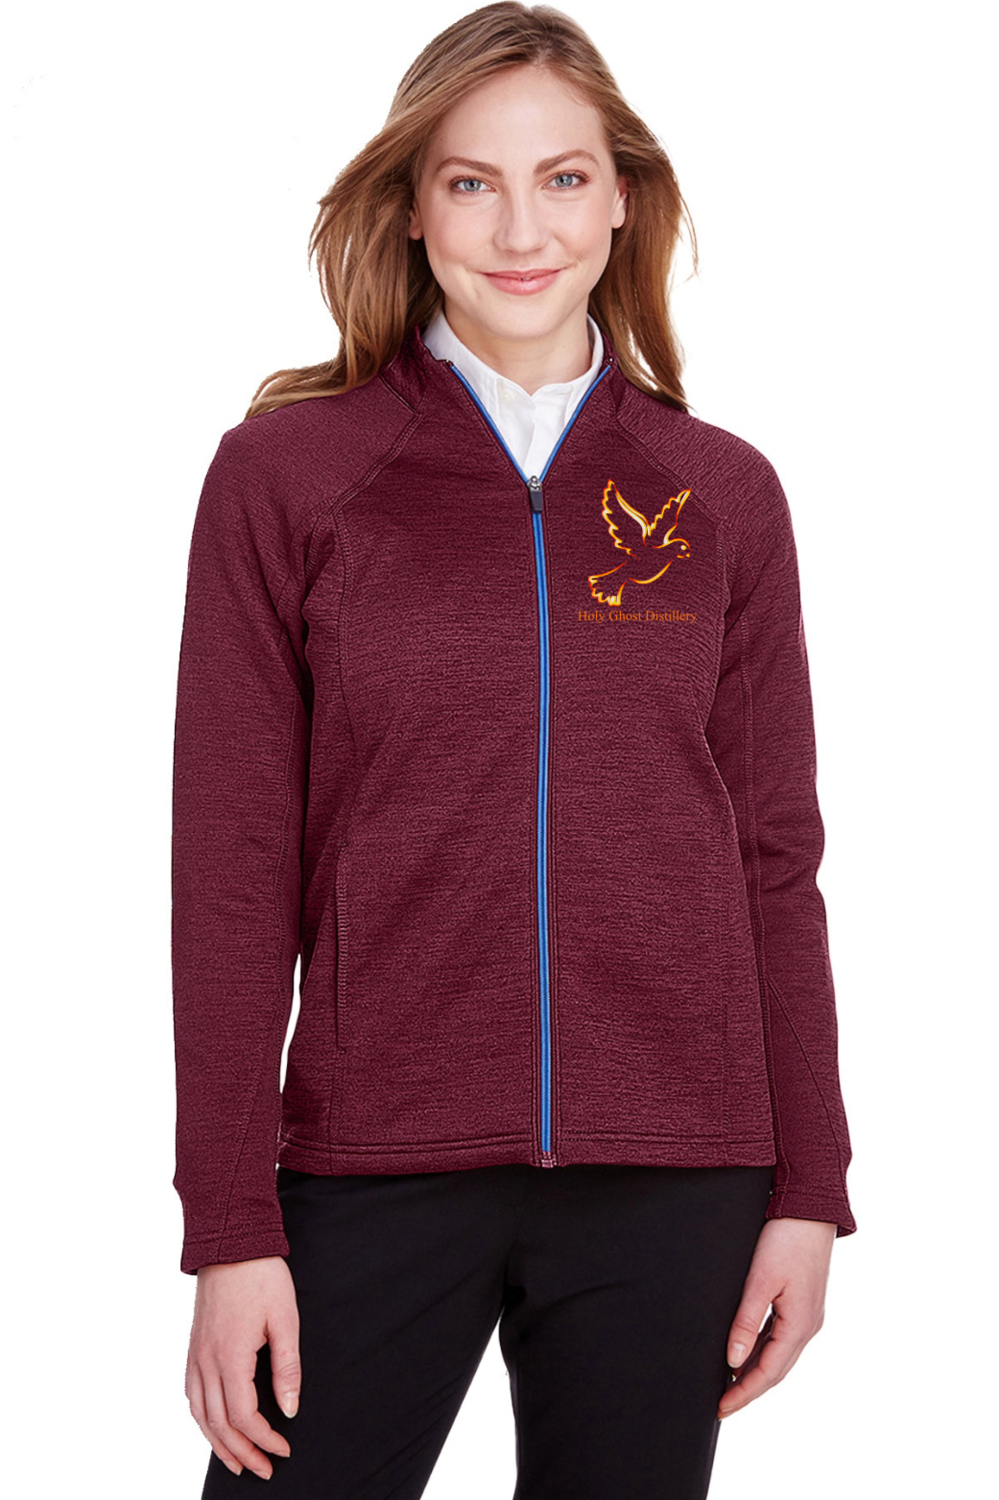 Women's Embroidered Full-Zip Jacket - SIZE XL